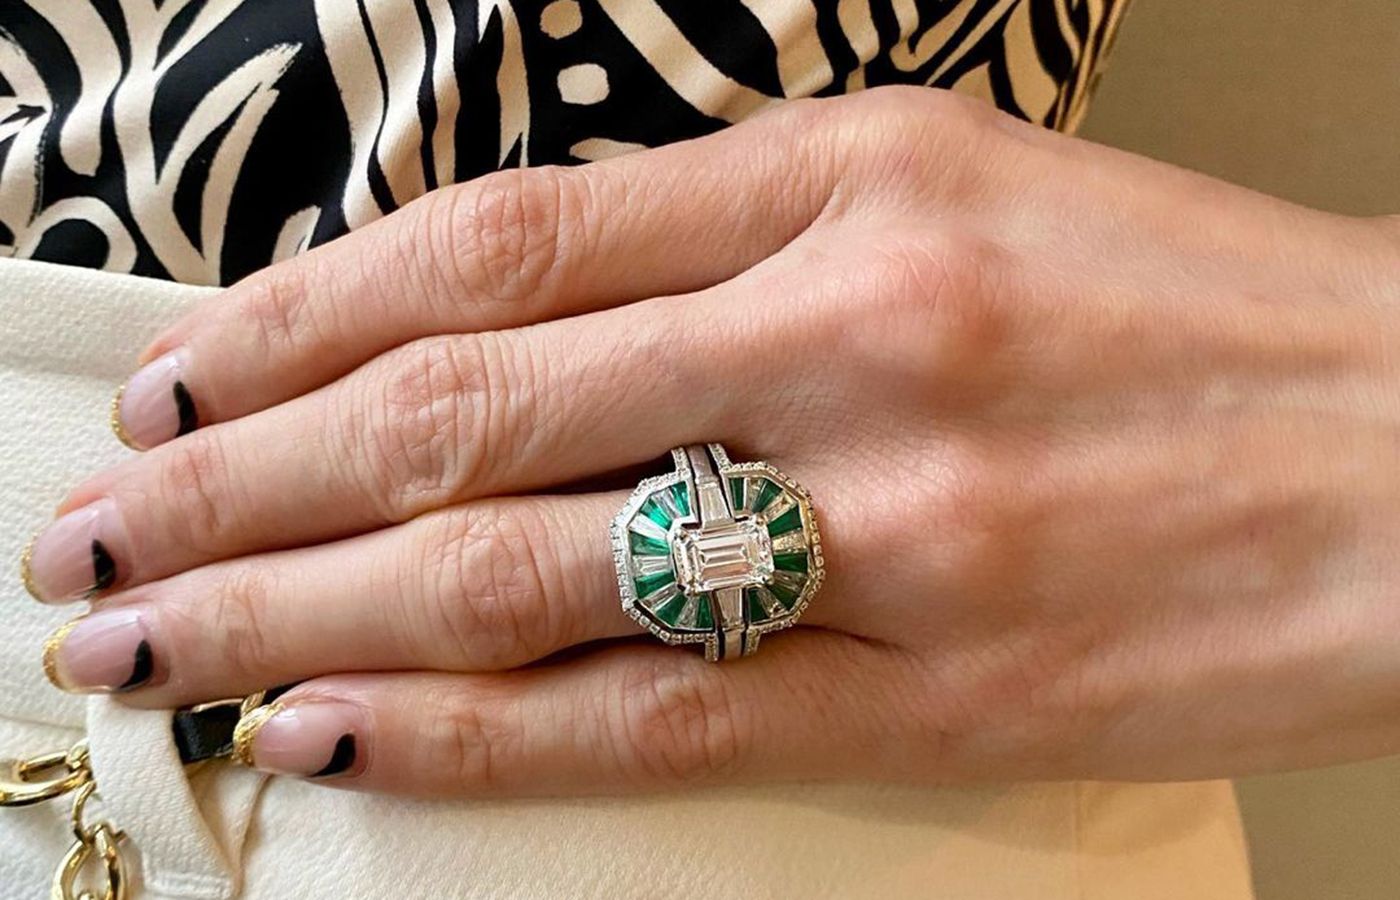 Serpentine Jewels engagement ring and ring jacket set with diamonds and emeralds